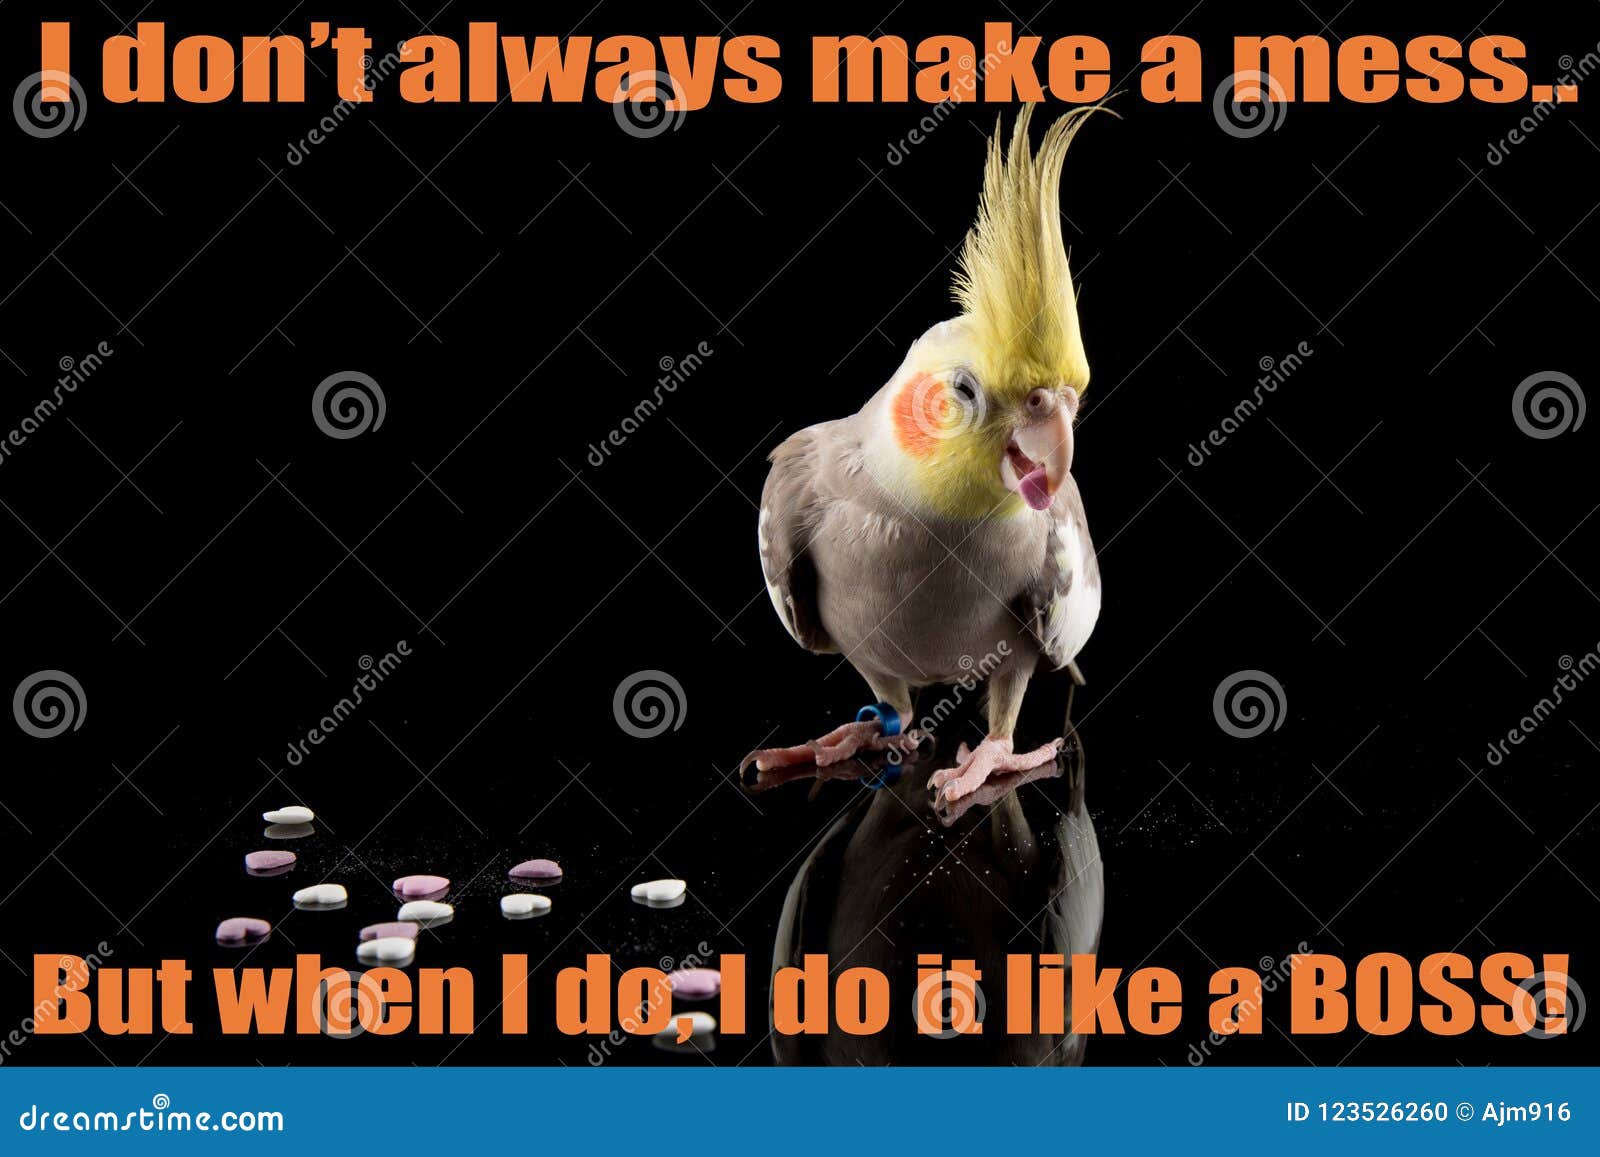 Funny Cockatiel Quote Cute Parrot Meme Eating Small Hearts Parrot